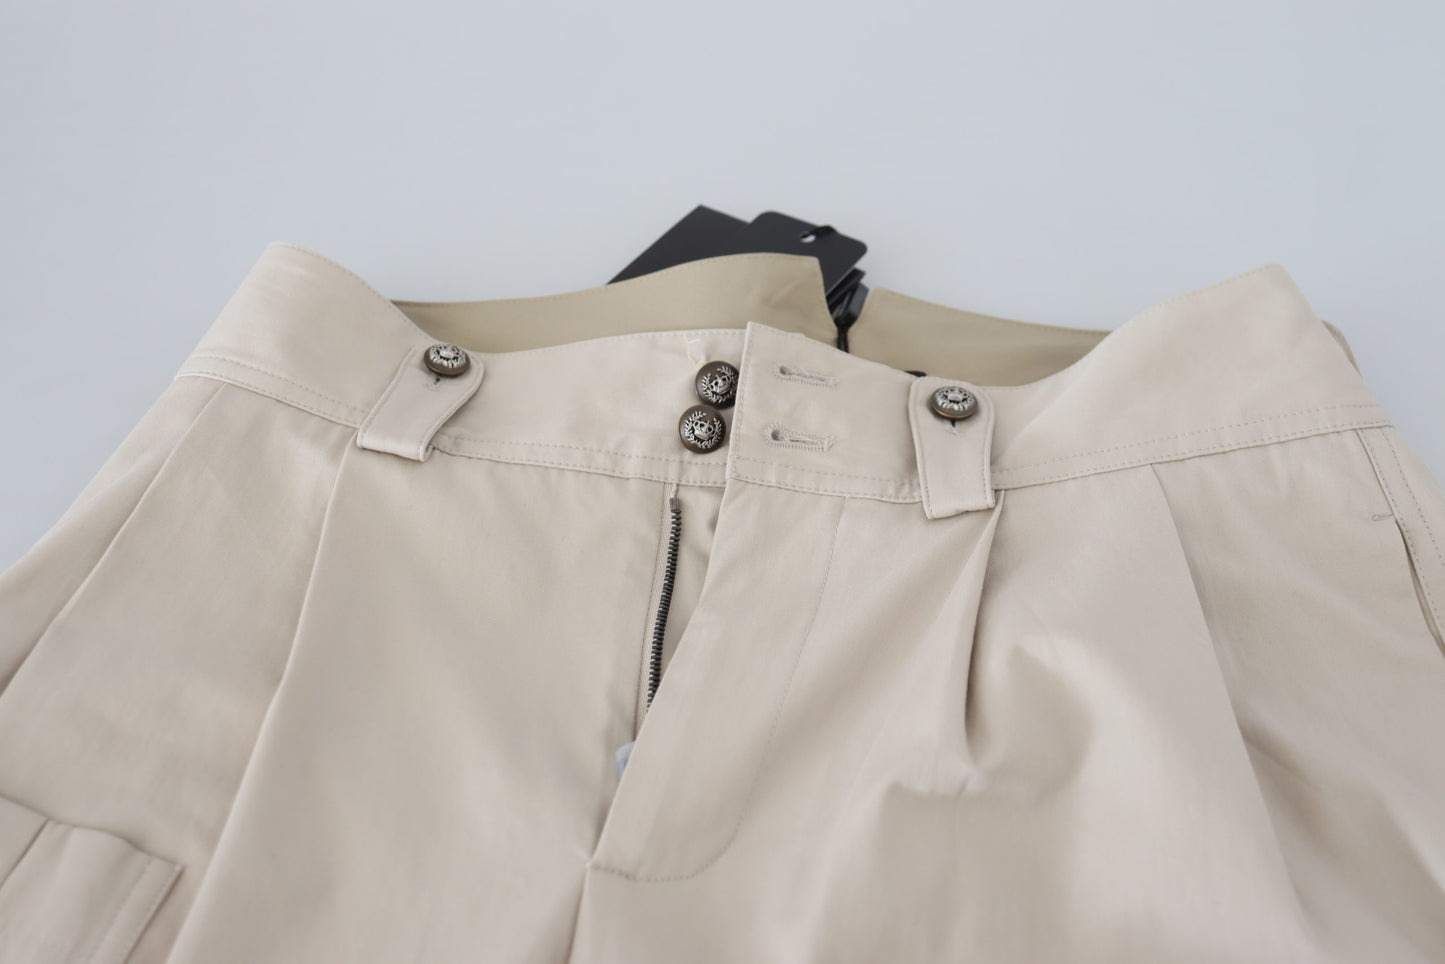 Dolce & Gabbana Chic Beige Cotton Trousers for Elegant Comfort